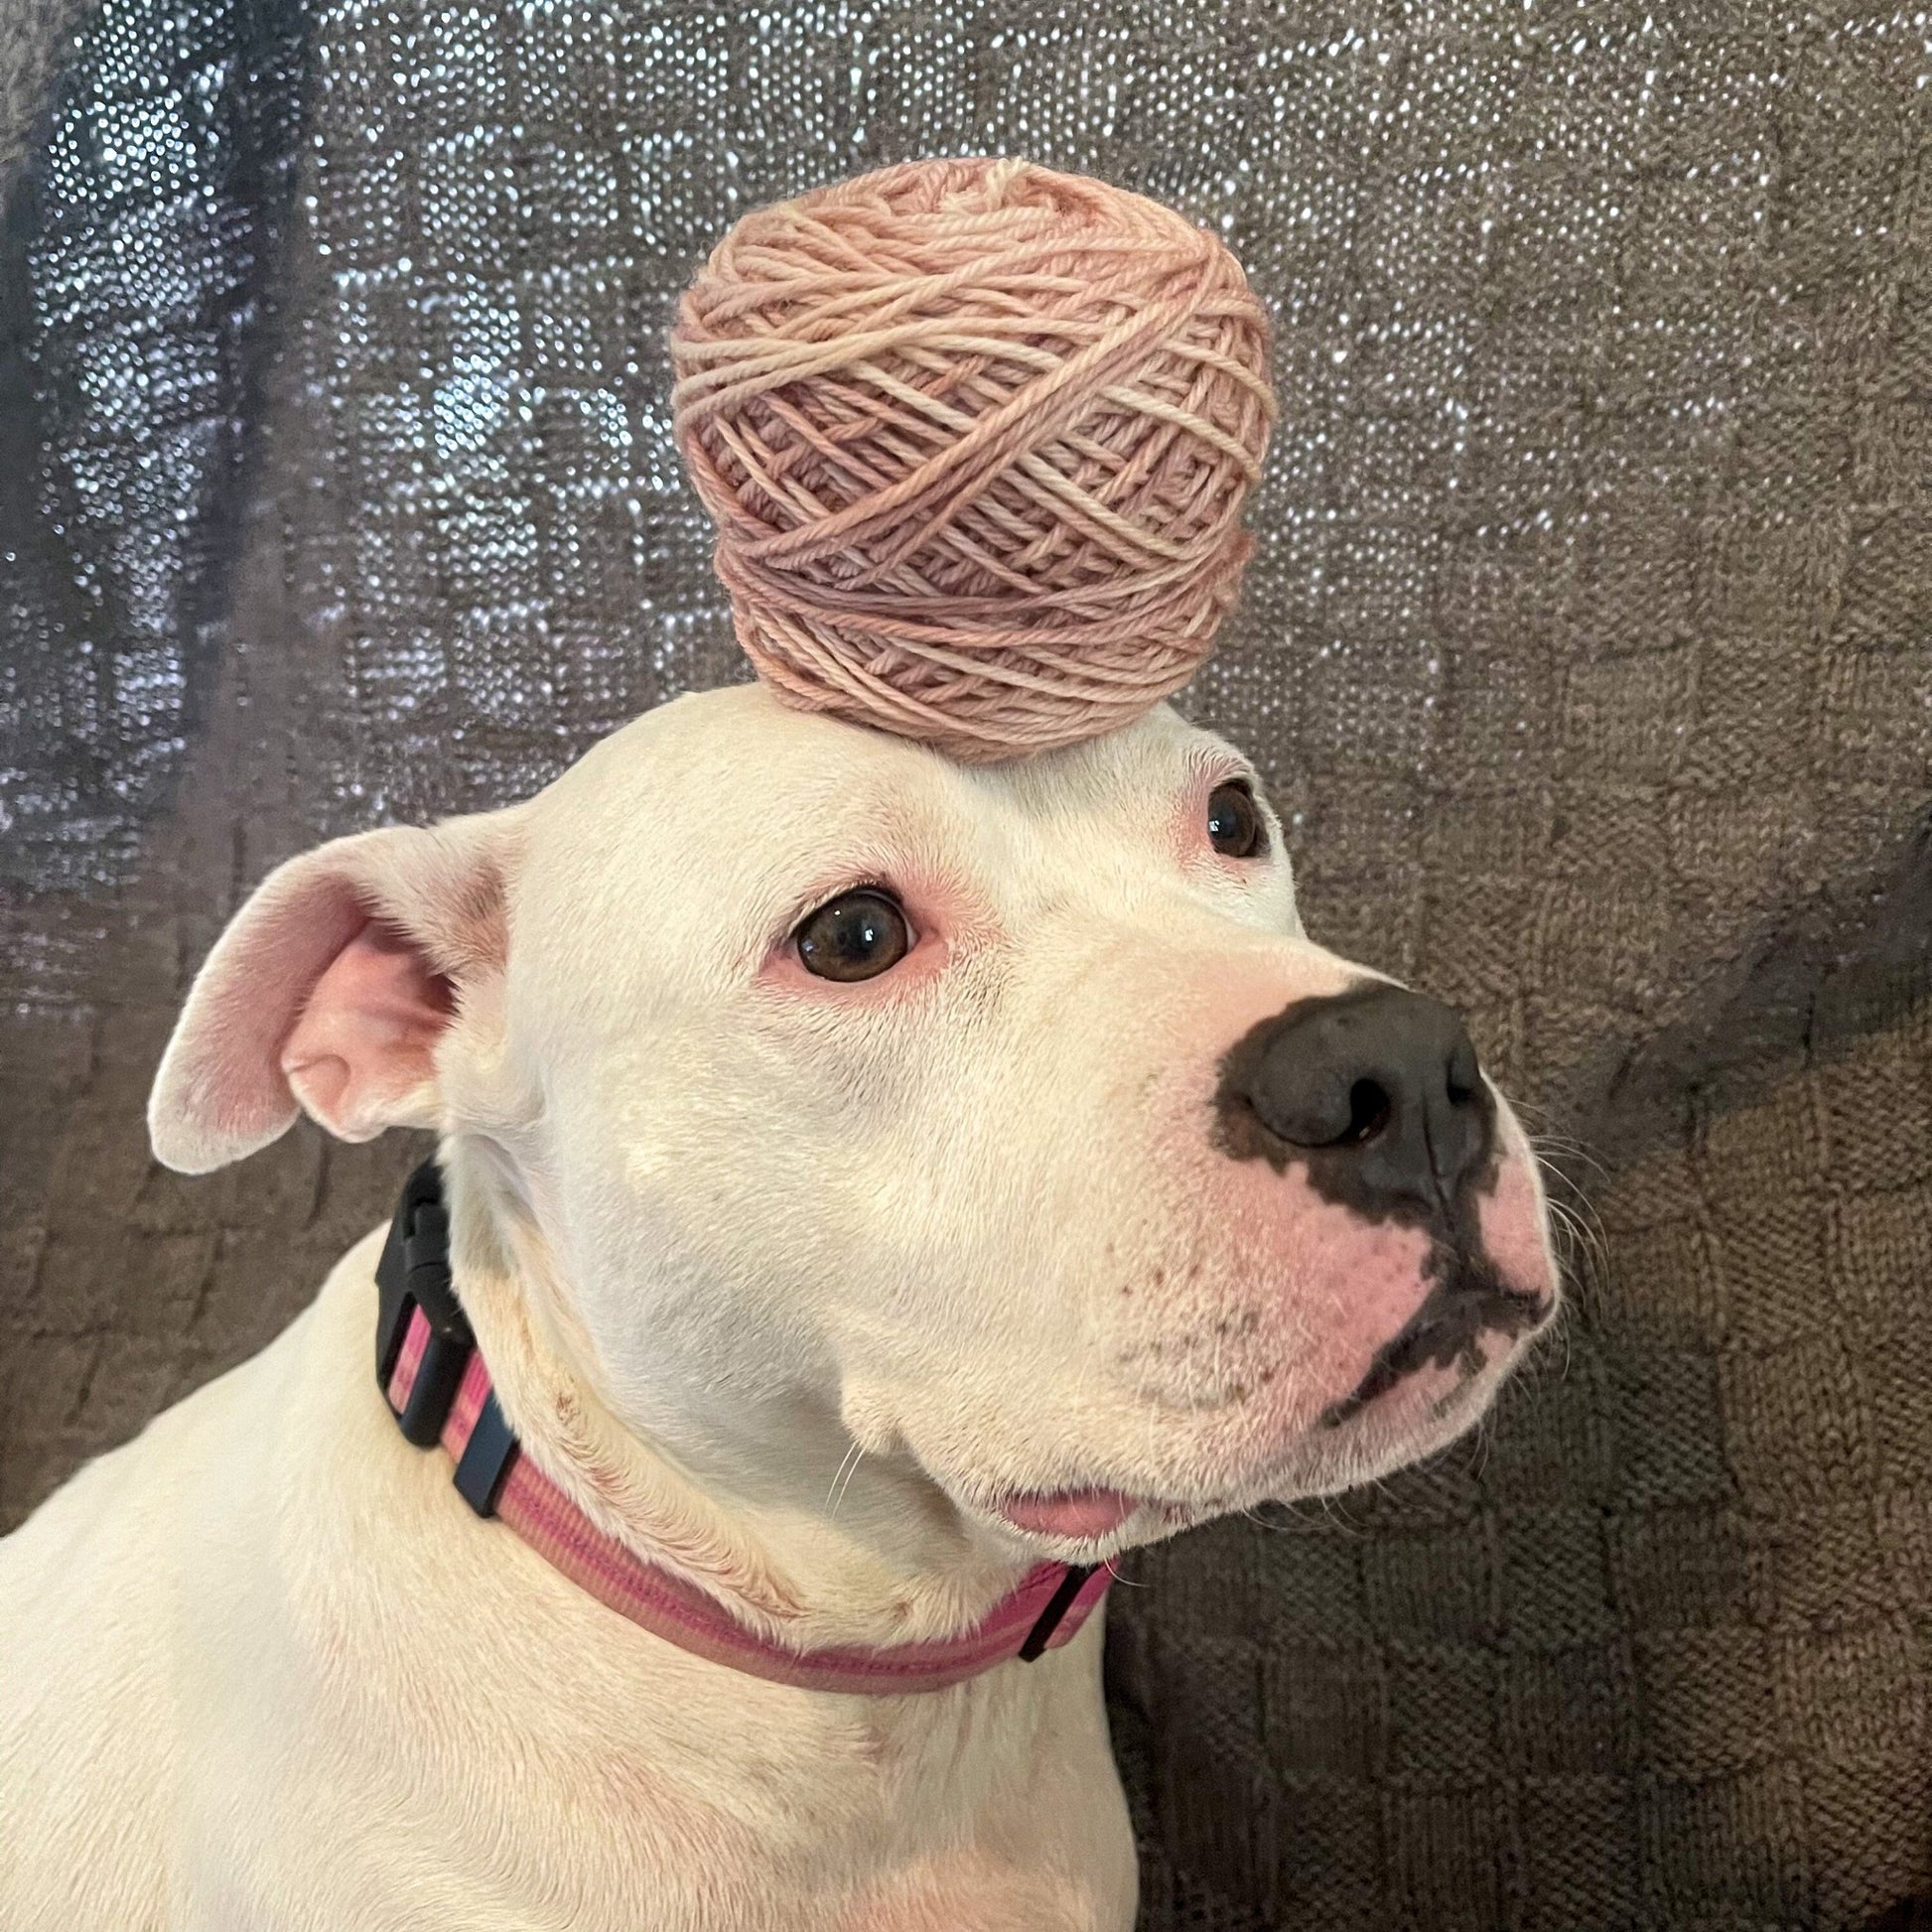 Our dog, Pixie, sits with a cake of Pink Pibble yarn balanced on her head. It's the same color as her ears, nose, and the skin around her eyes.